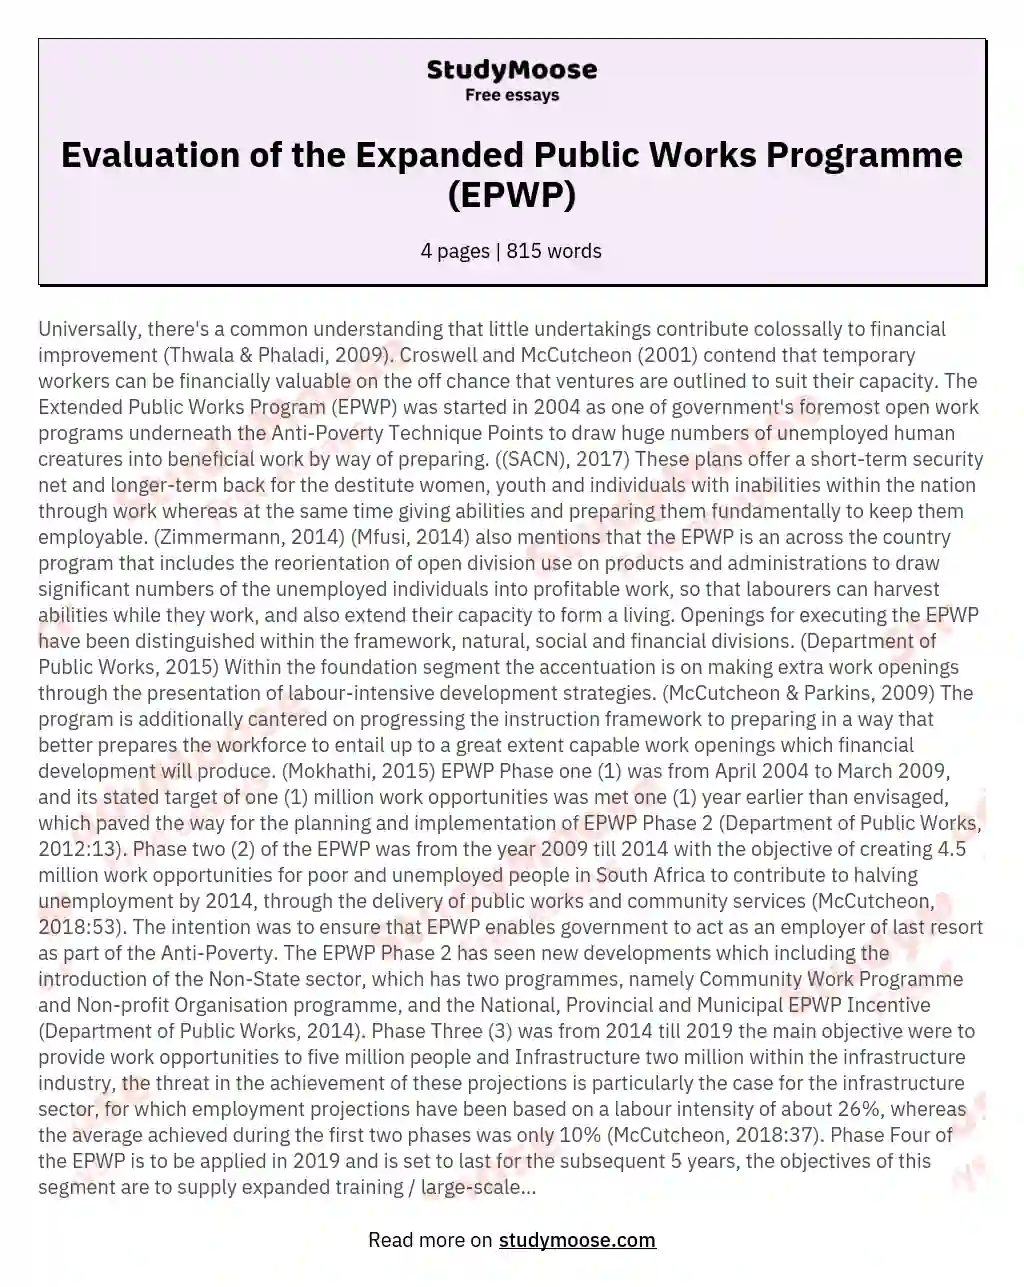 Evaluation of the Expanded Public Works Programme (EPWP) essay